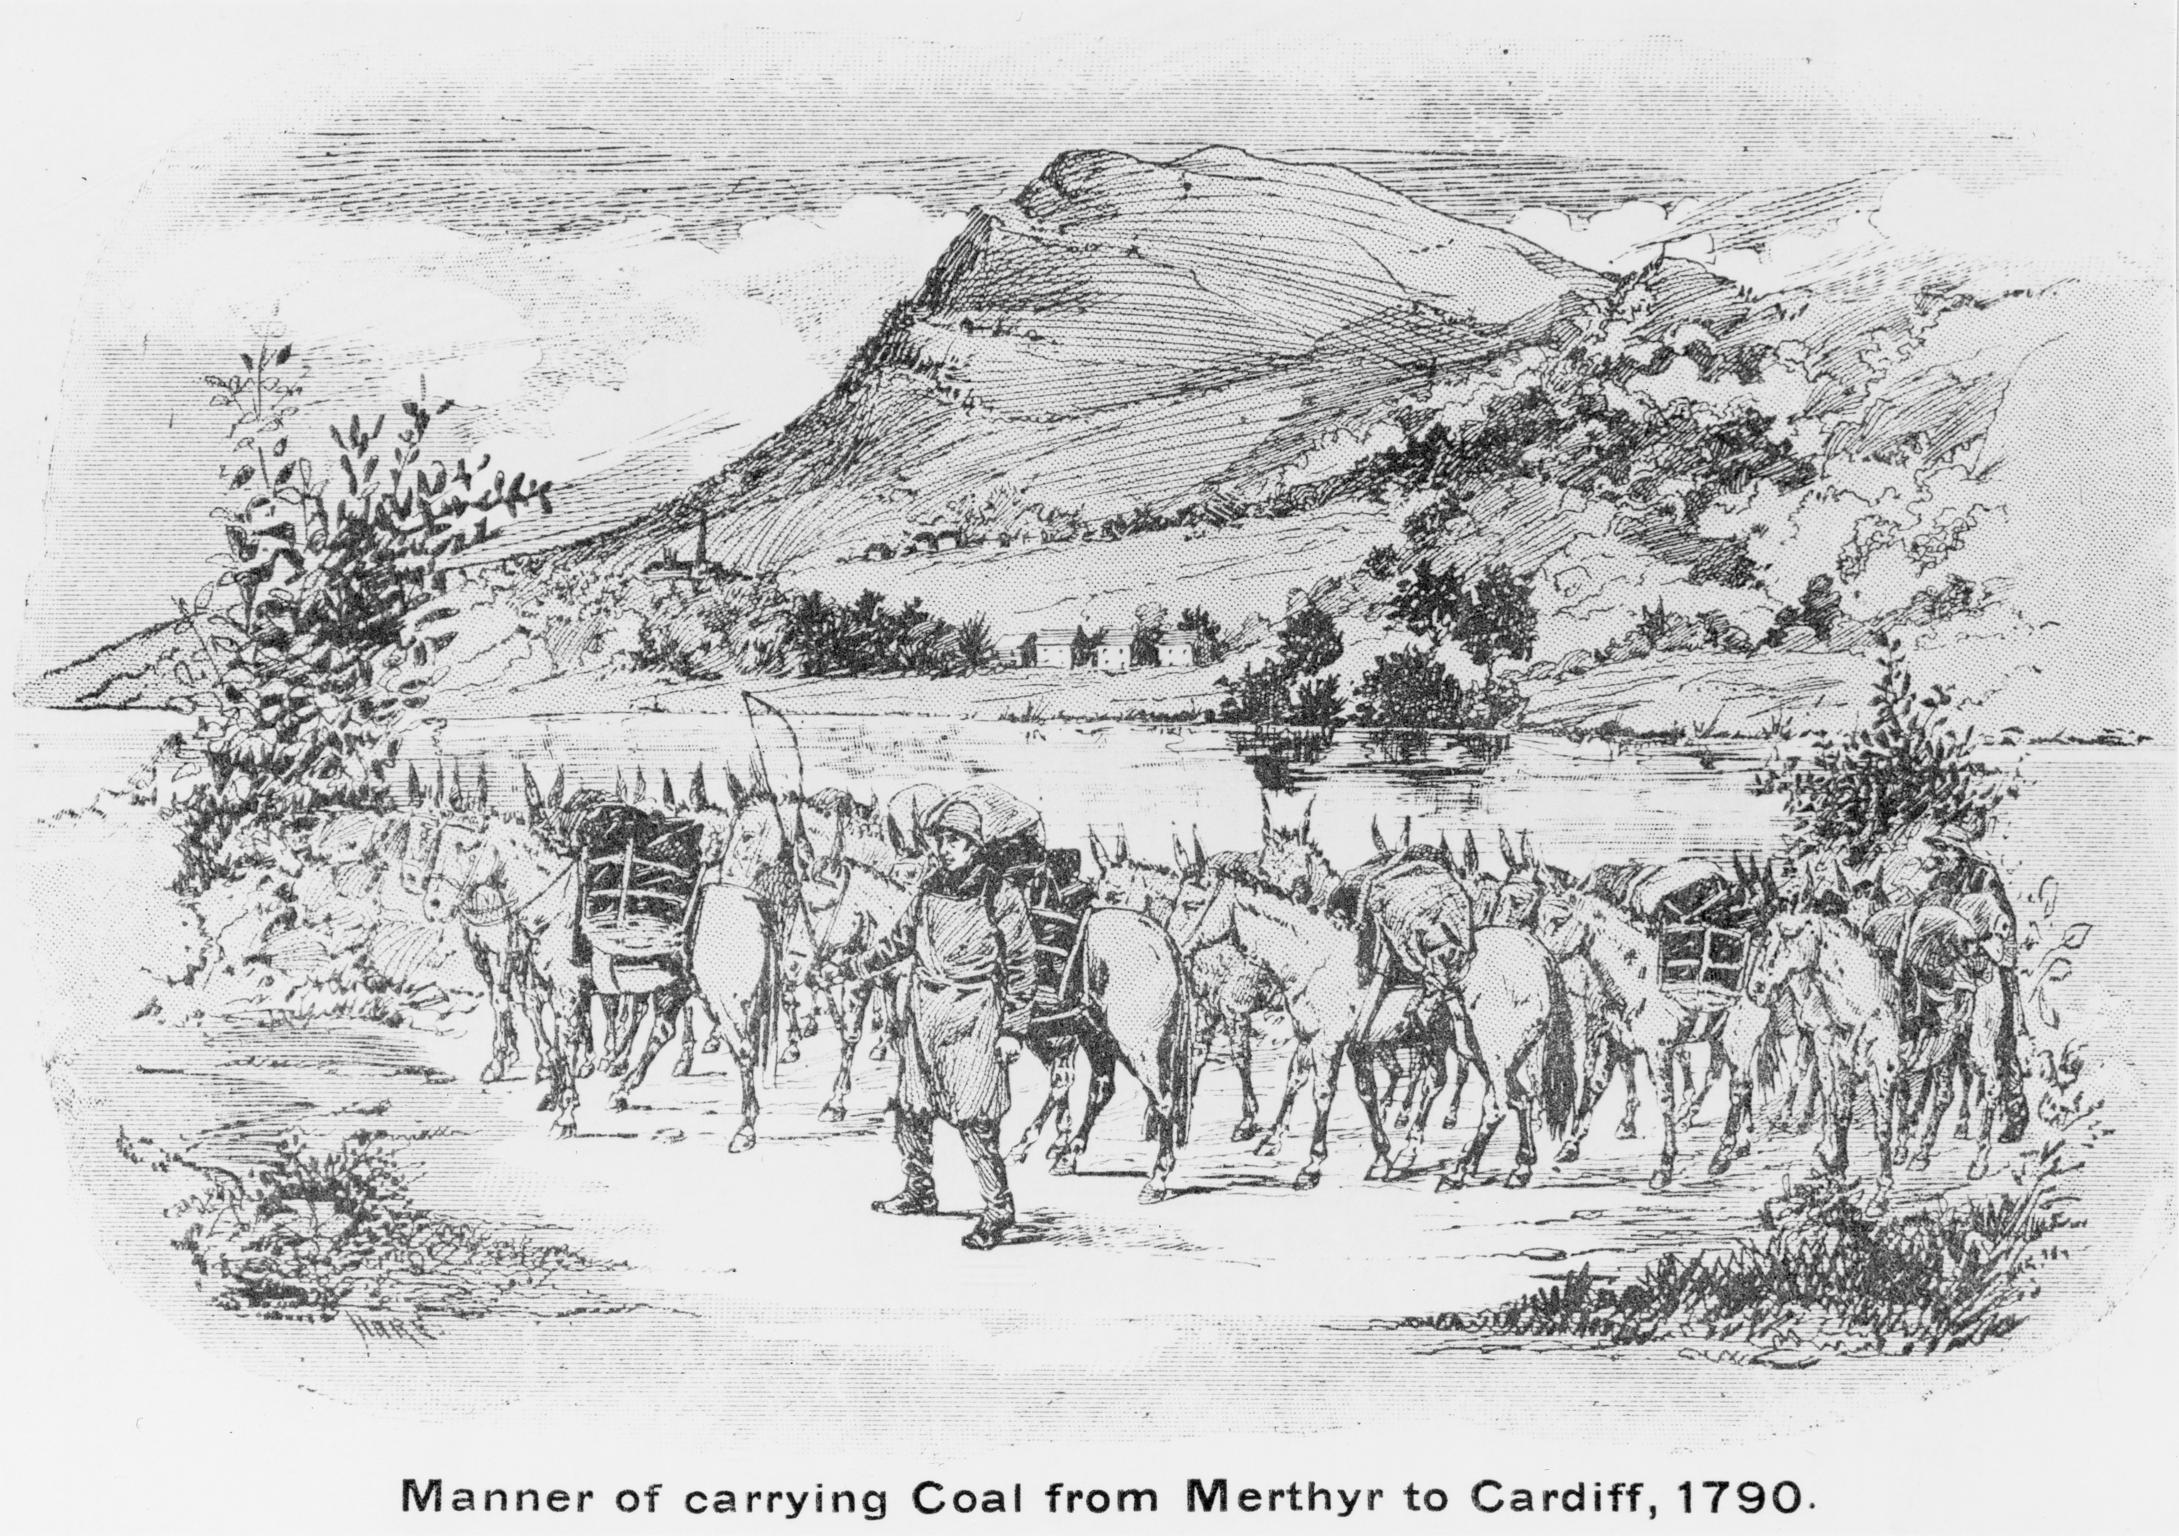 Carrying Coal from Merthyr to Cardiff